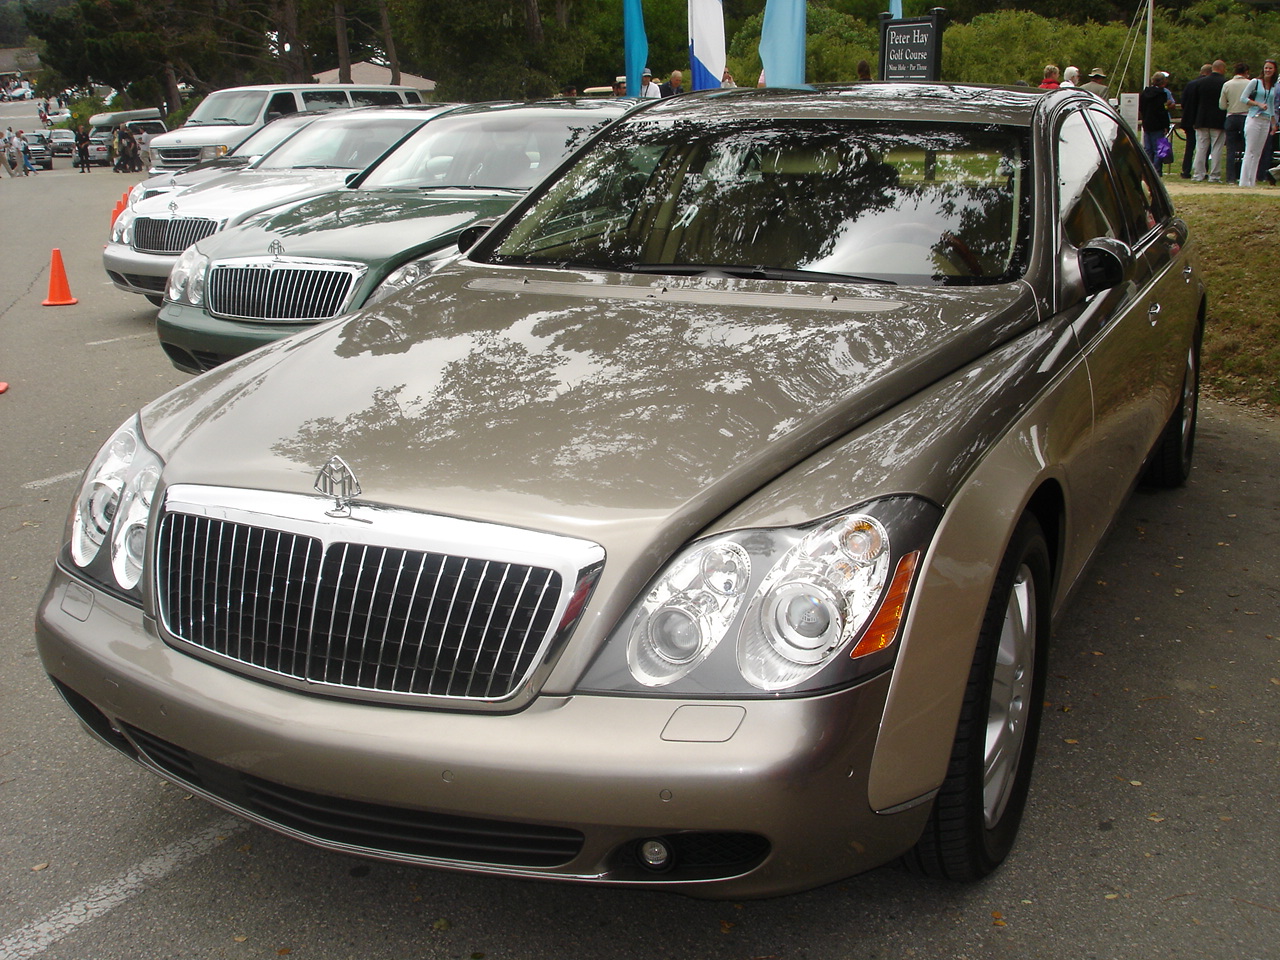 Several Maybach 57 and 62 models at the 2005 Concours d'Elegance in Pebble Beach, CA